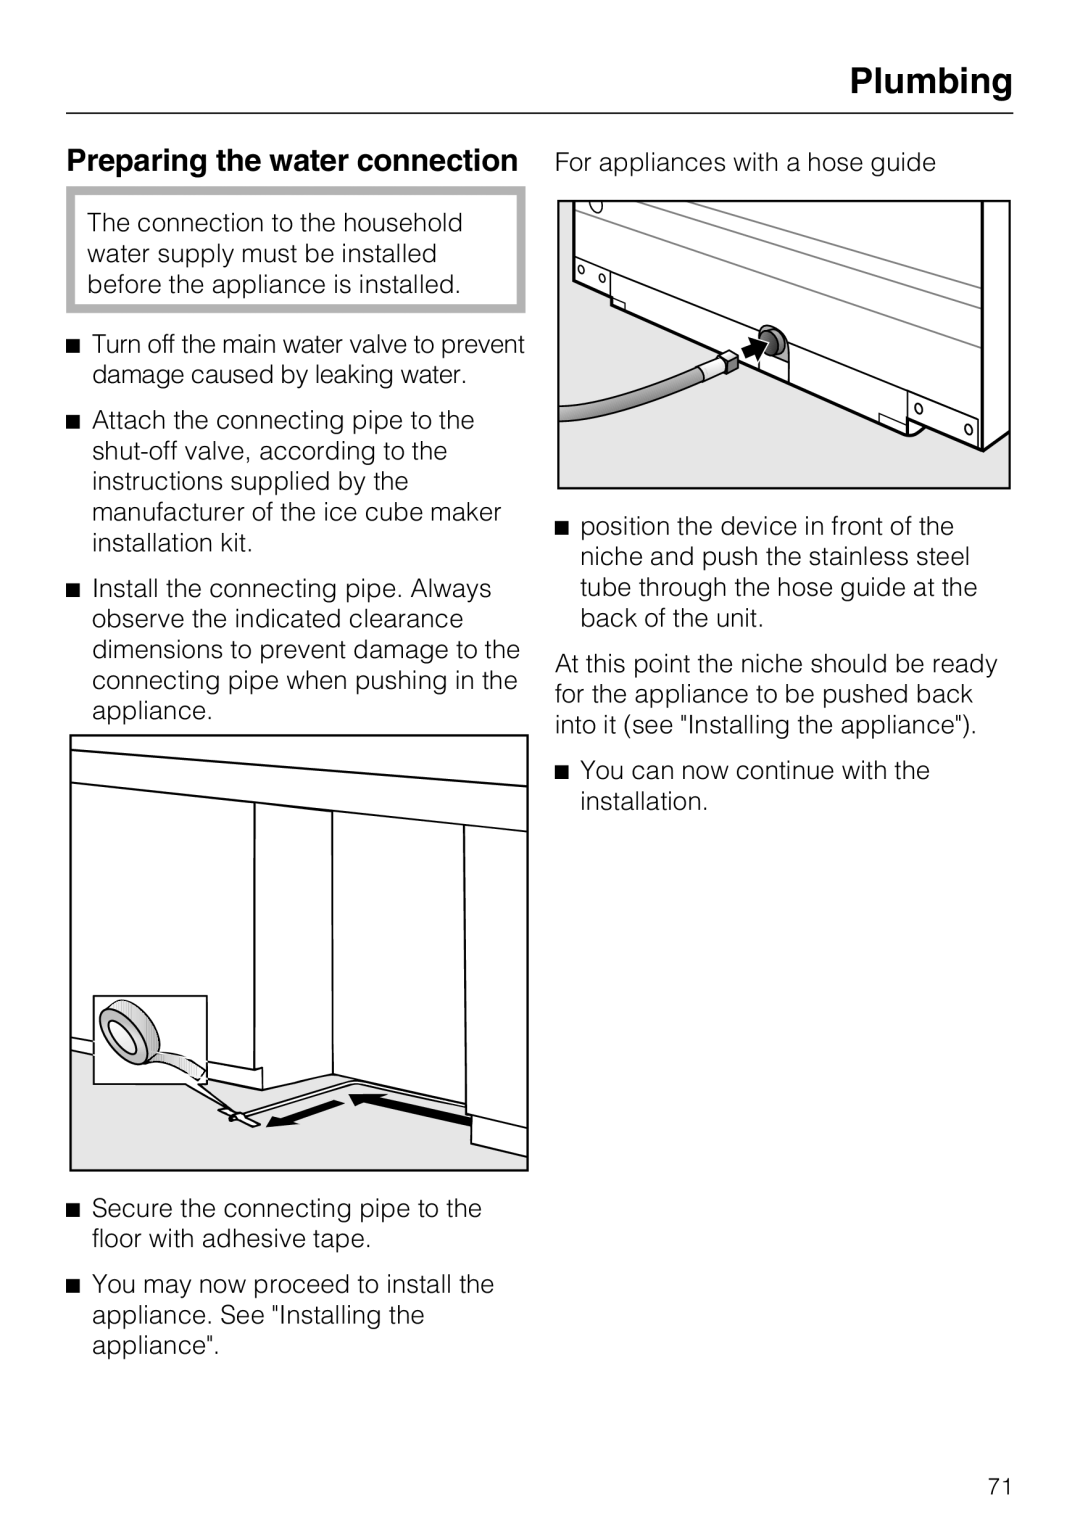 Miele F 1411 Vi installation instructions Plumbing, You can now continue with the installation 